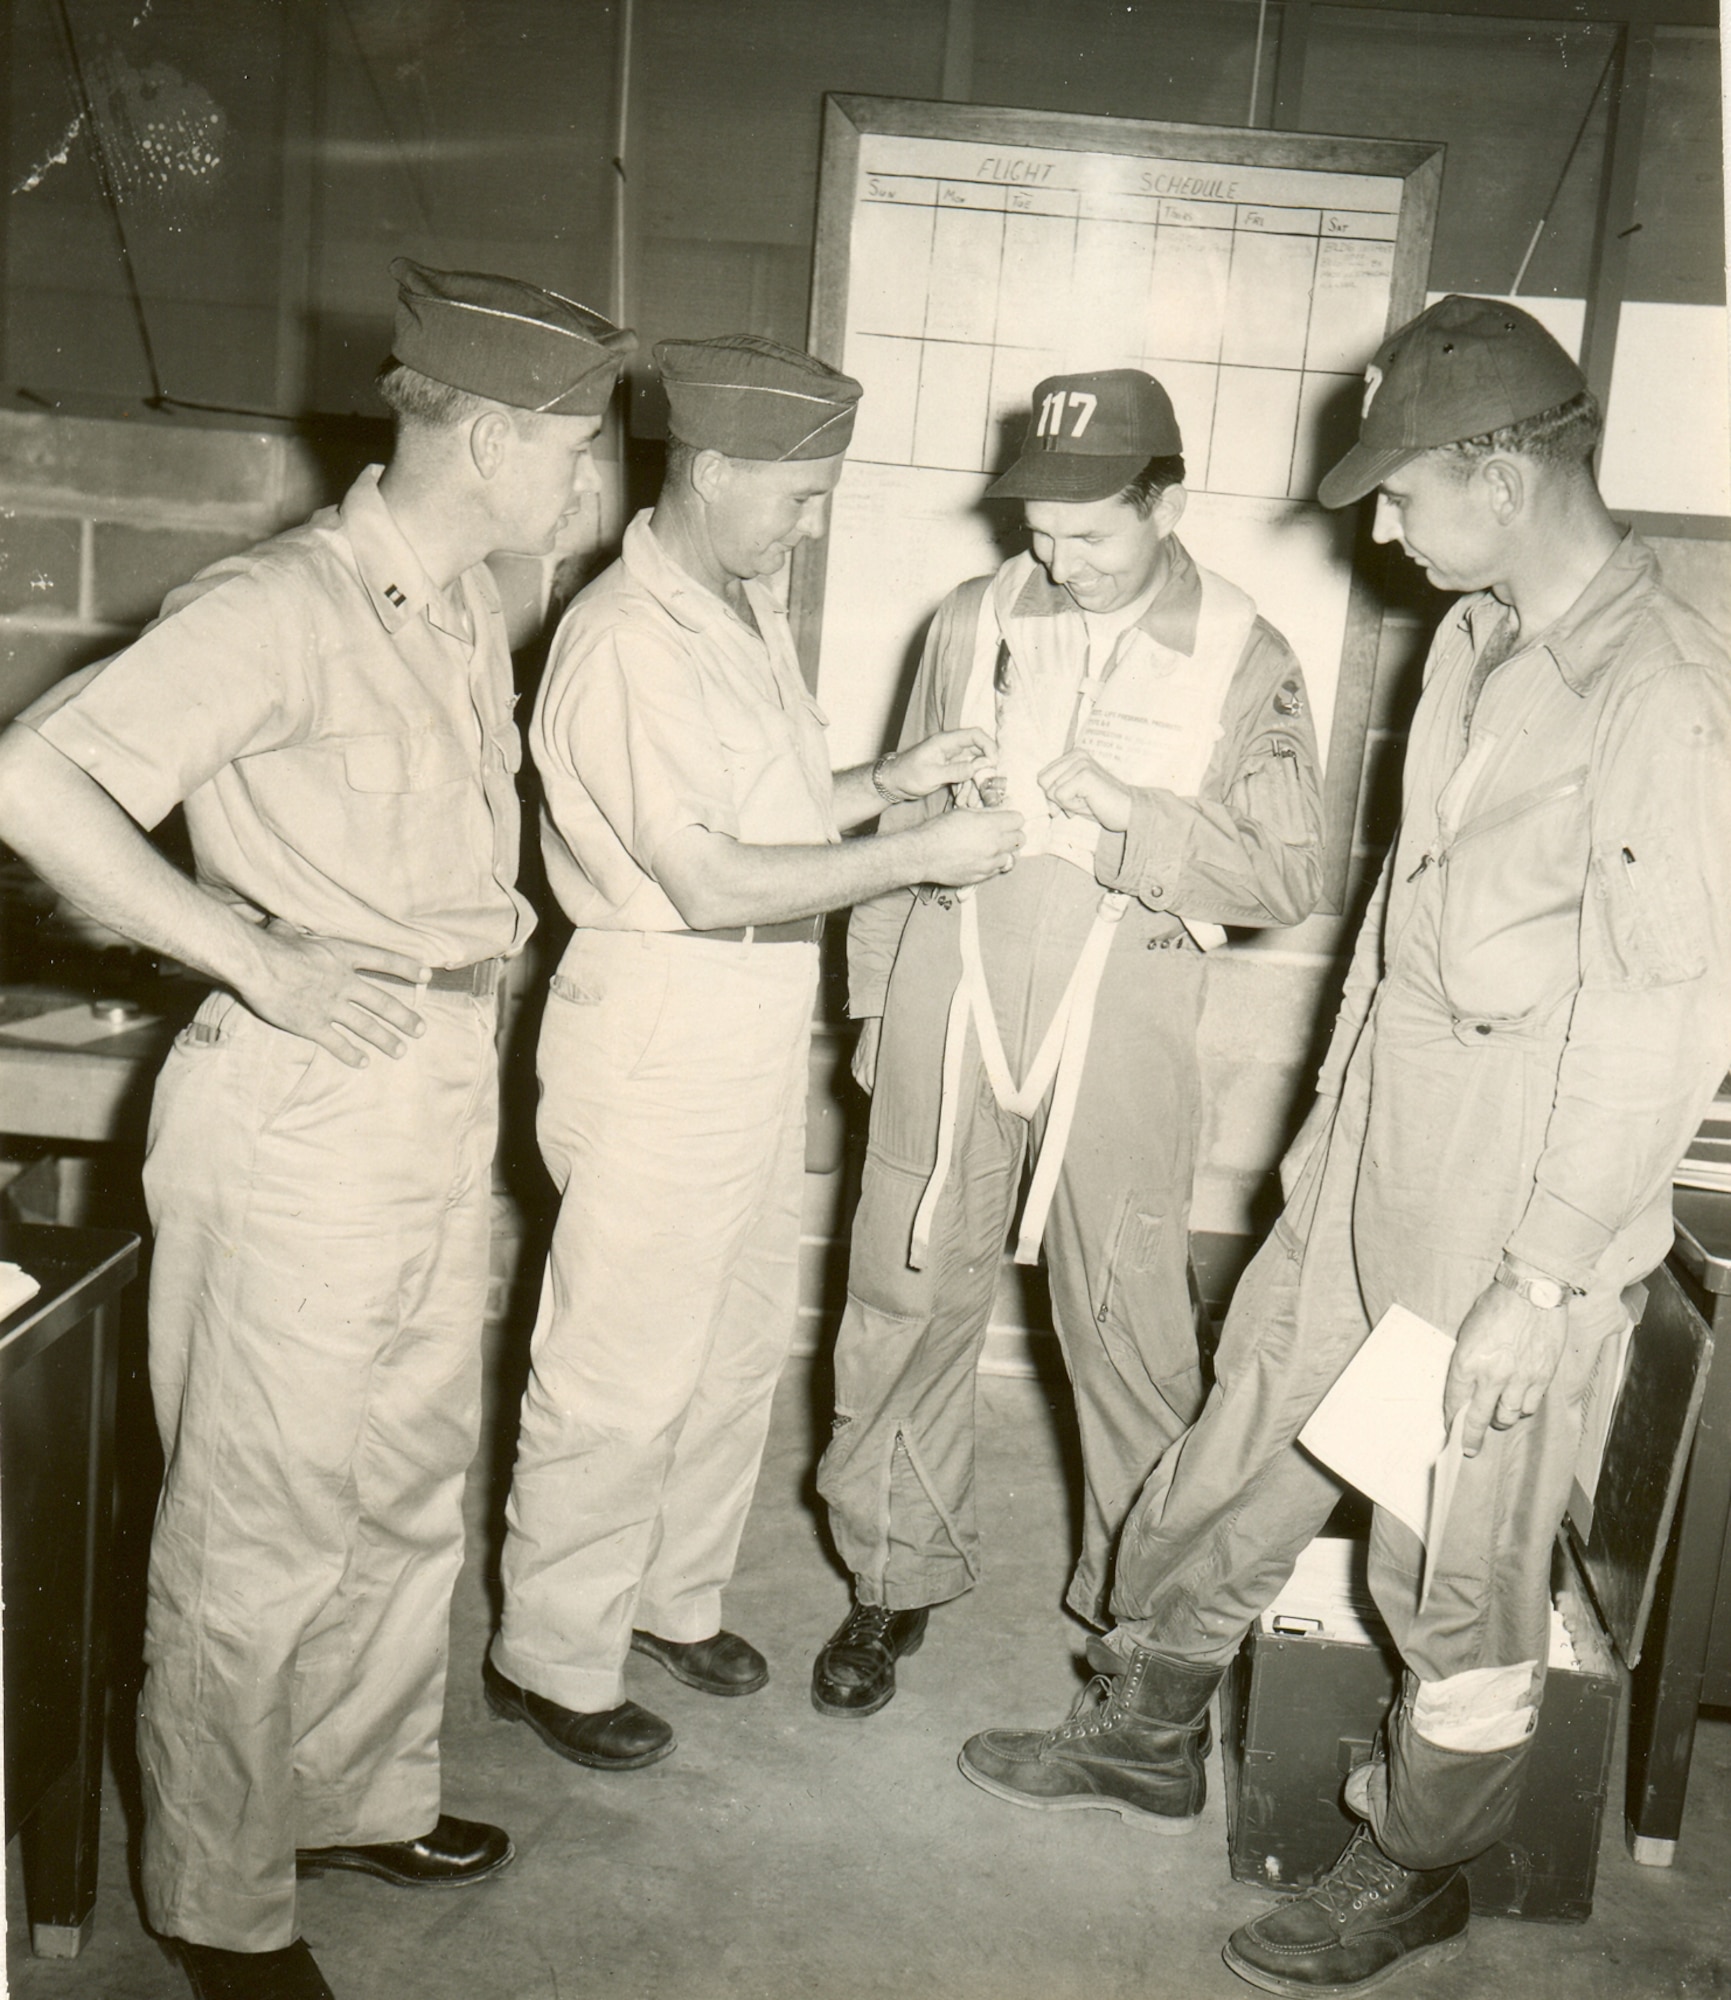 Captain Bill Fry (center with harness) and Lt. Gene Crackle (far left) had been the first two pilots to sign up for the new squadron to be formed at Hutchinson.